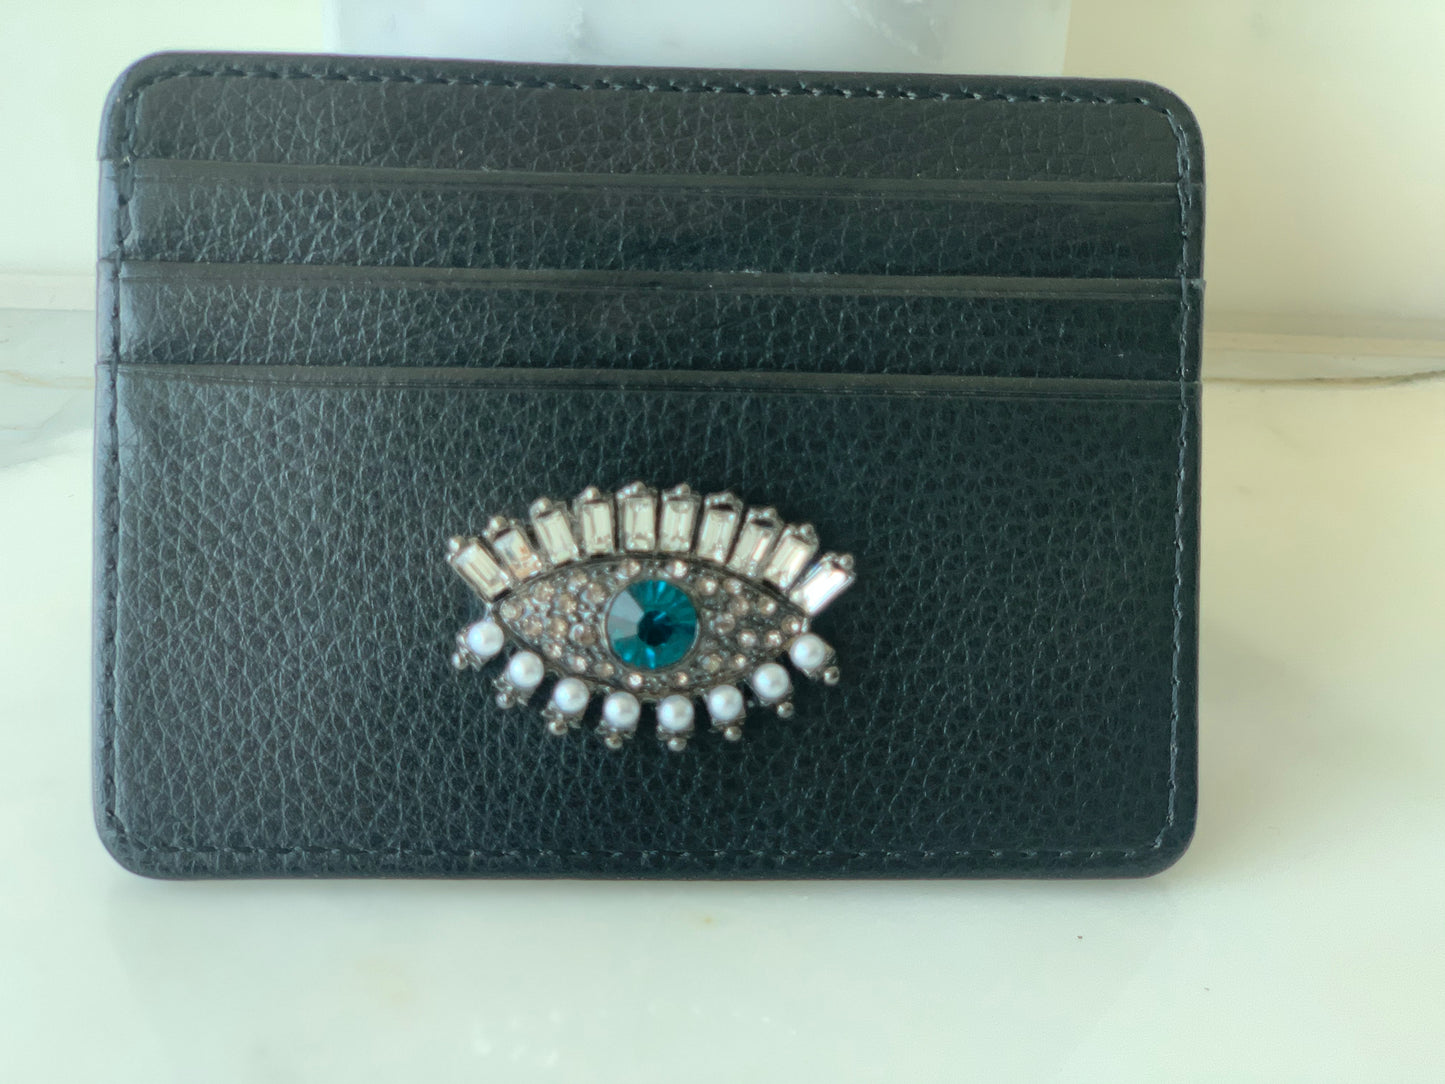 CREDIT CARD HOLDER WITH BLING